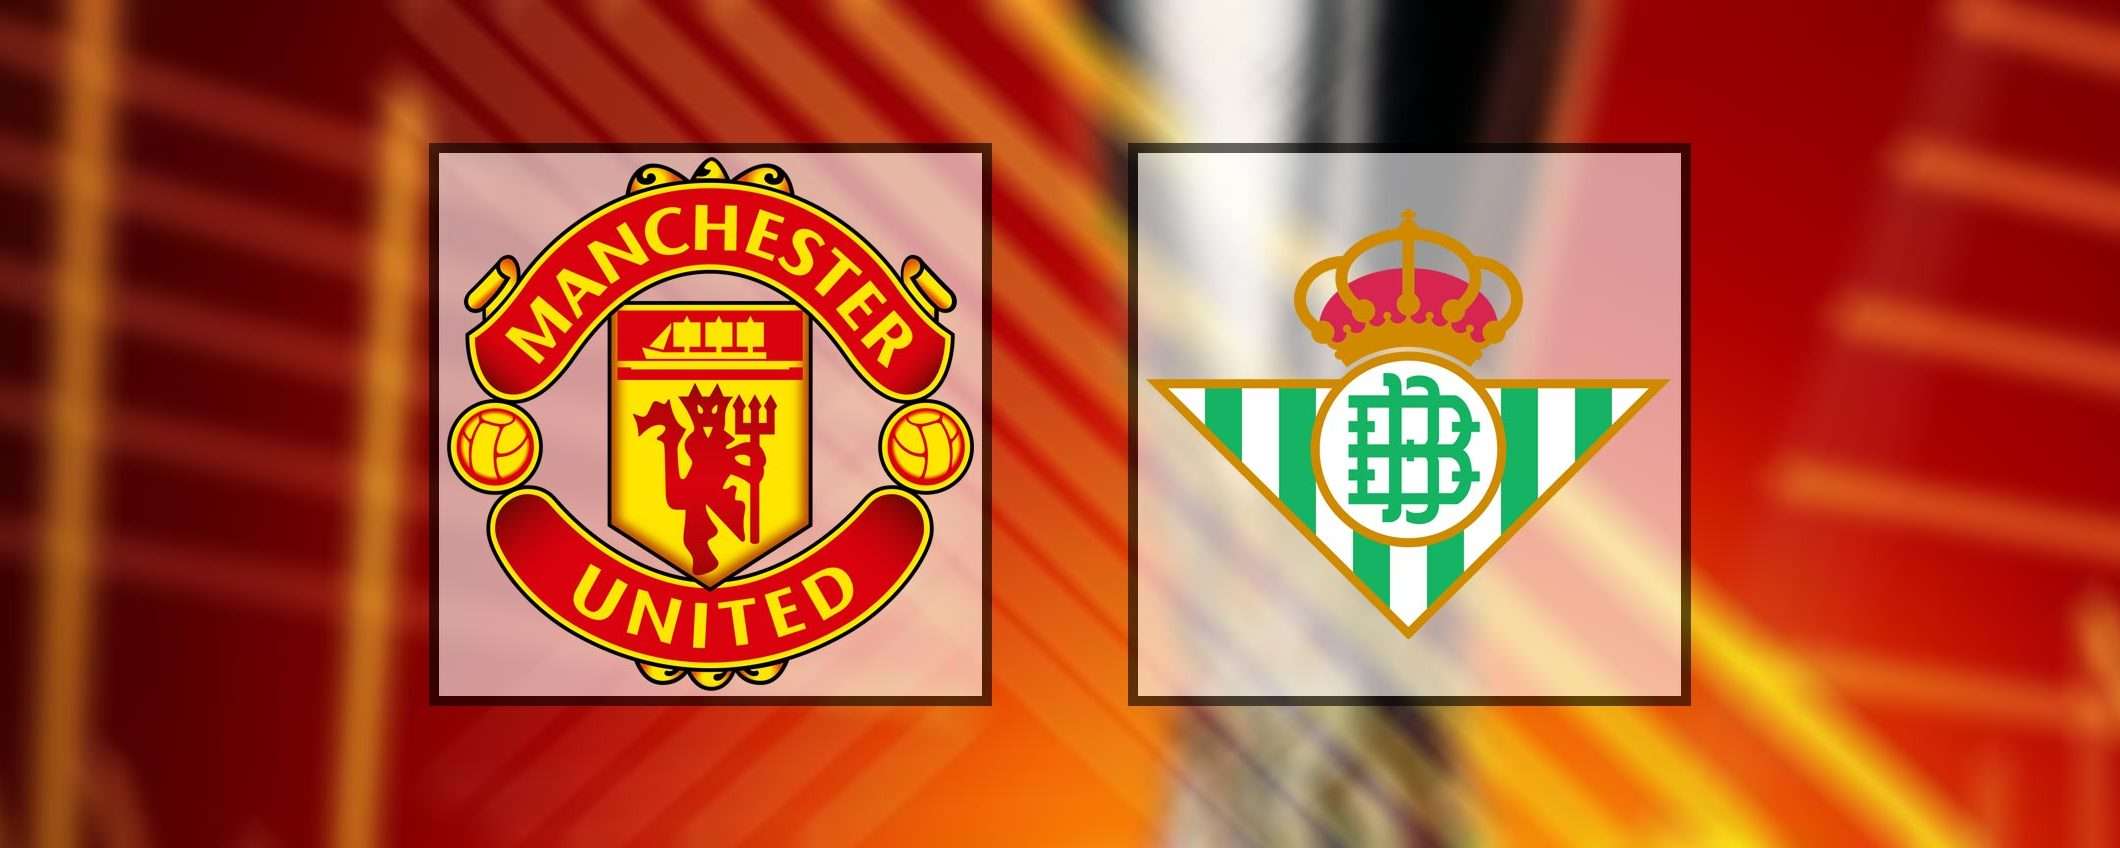 Come vedere Manchester United-Betis in streaming